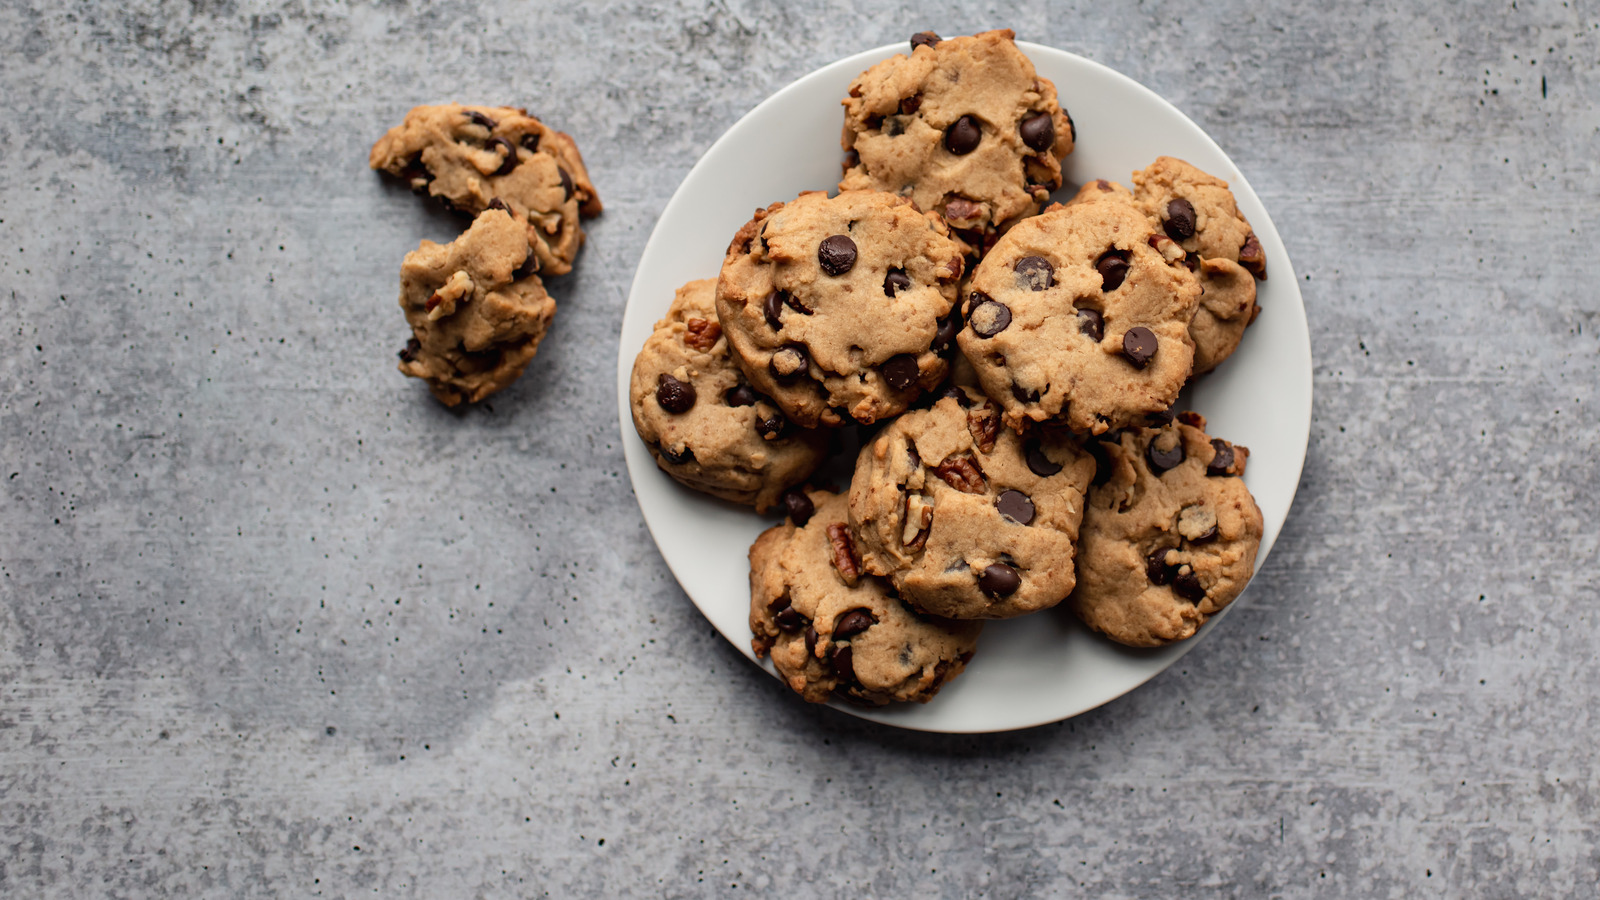 https://www.tastingtable.com/img/gallery/the-best-chocolate-chip-cookies-in-every-state/l-intro-1657722618.jpg